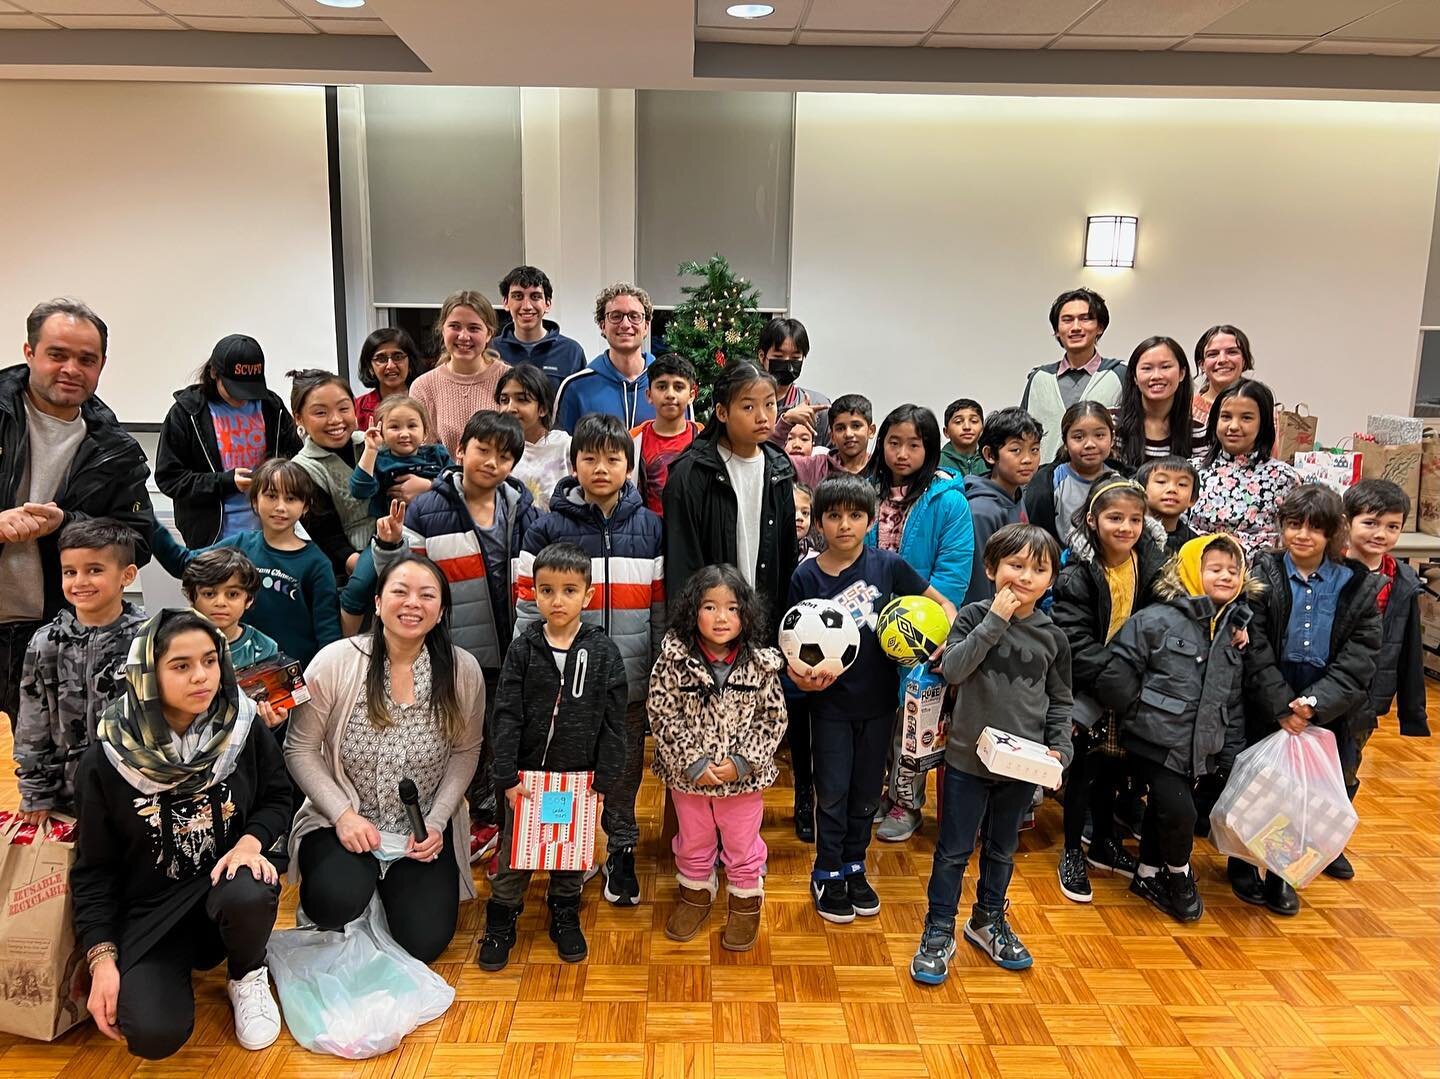 Check out these fun photos from our annual holiday party, where Santa gave out over 140 gifts to Afghan and Burmese families and their children!
To volunteer with or donate to WRAP to help us continue supporting families to sustainable self-reliance,